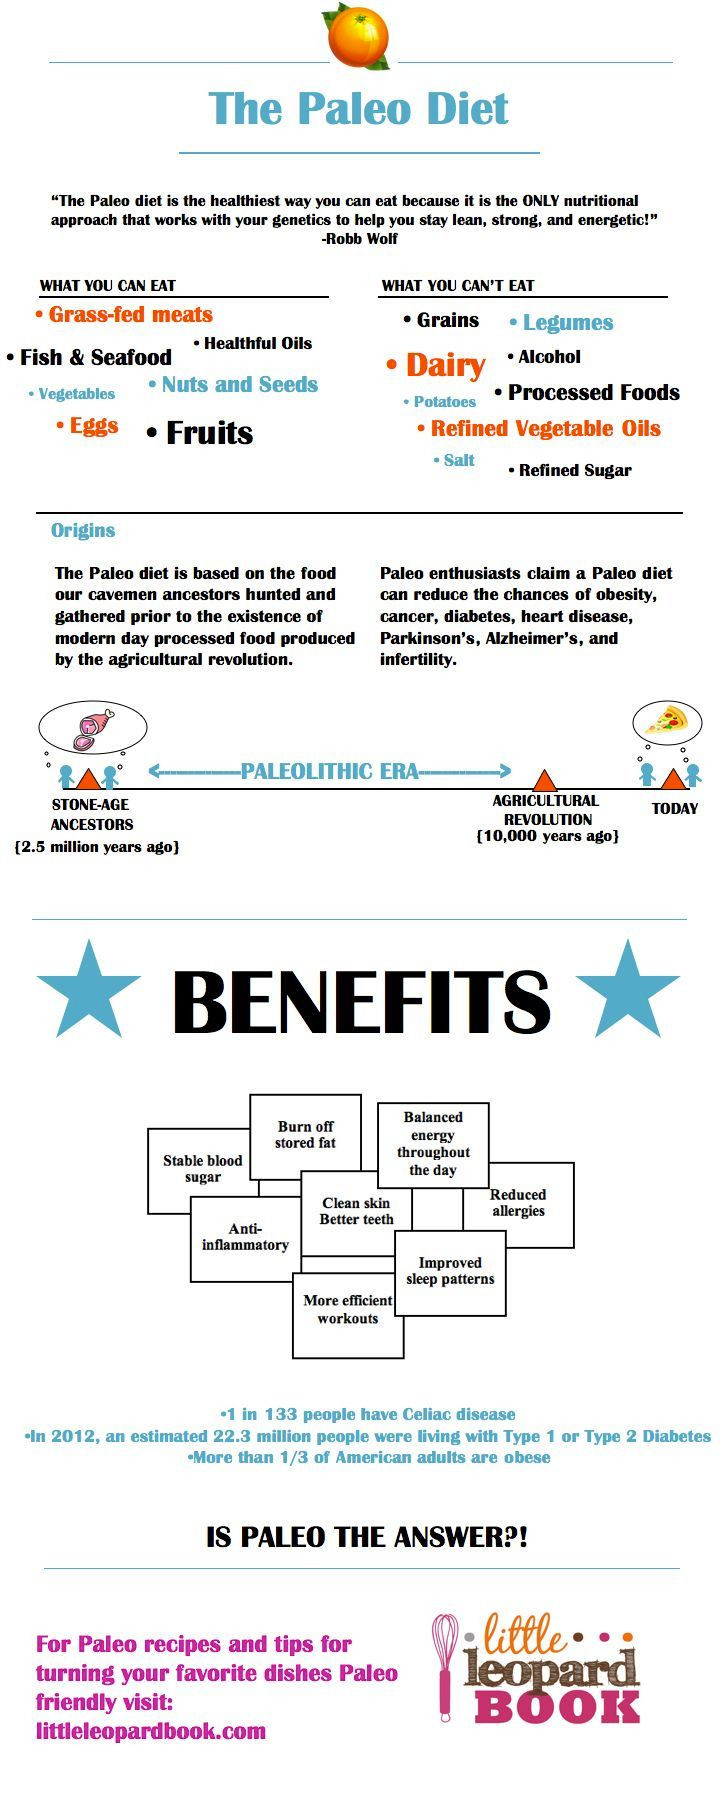 Paleo Diet Information
 the image for more information about the Paleo Diet